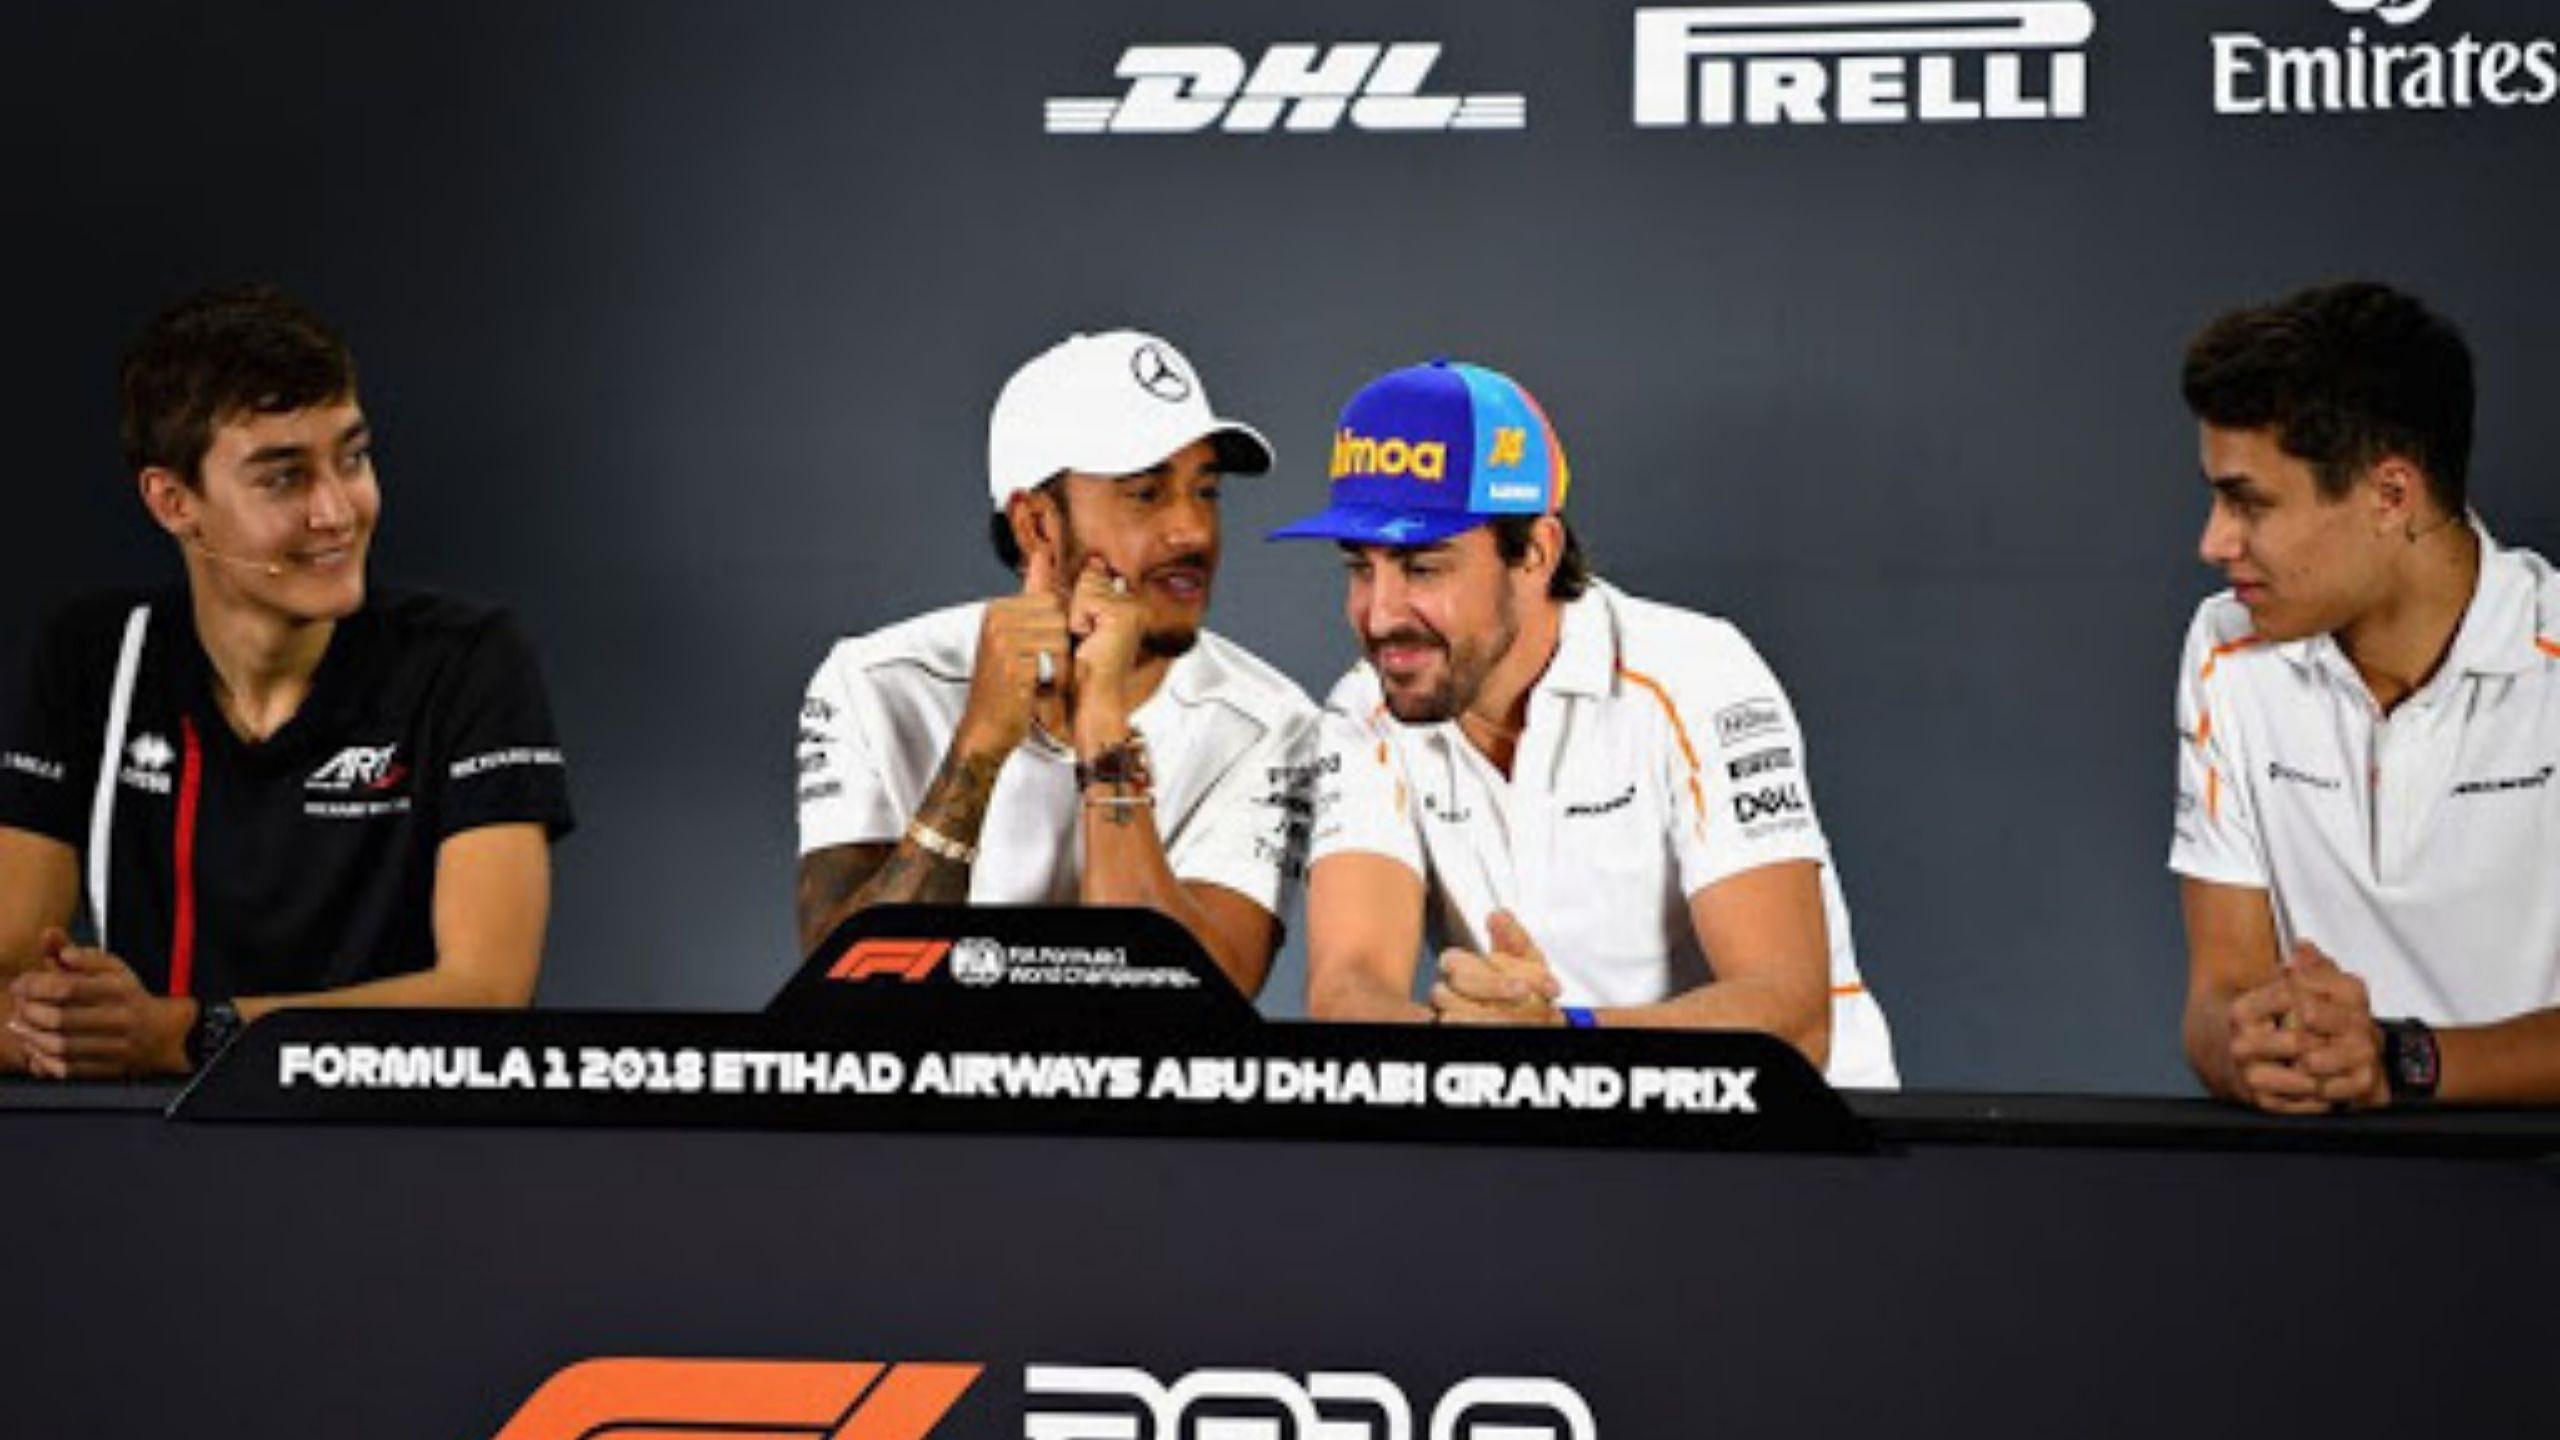 “In five days, not a hundred, he went from last to first" - Fernando Alonso evaluates the George Russell situation from Williams to Mercedes